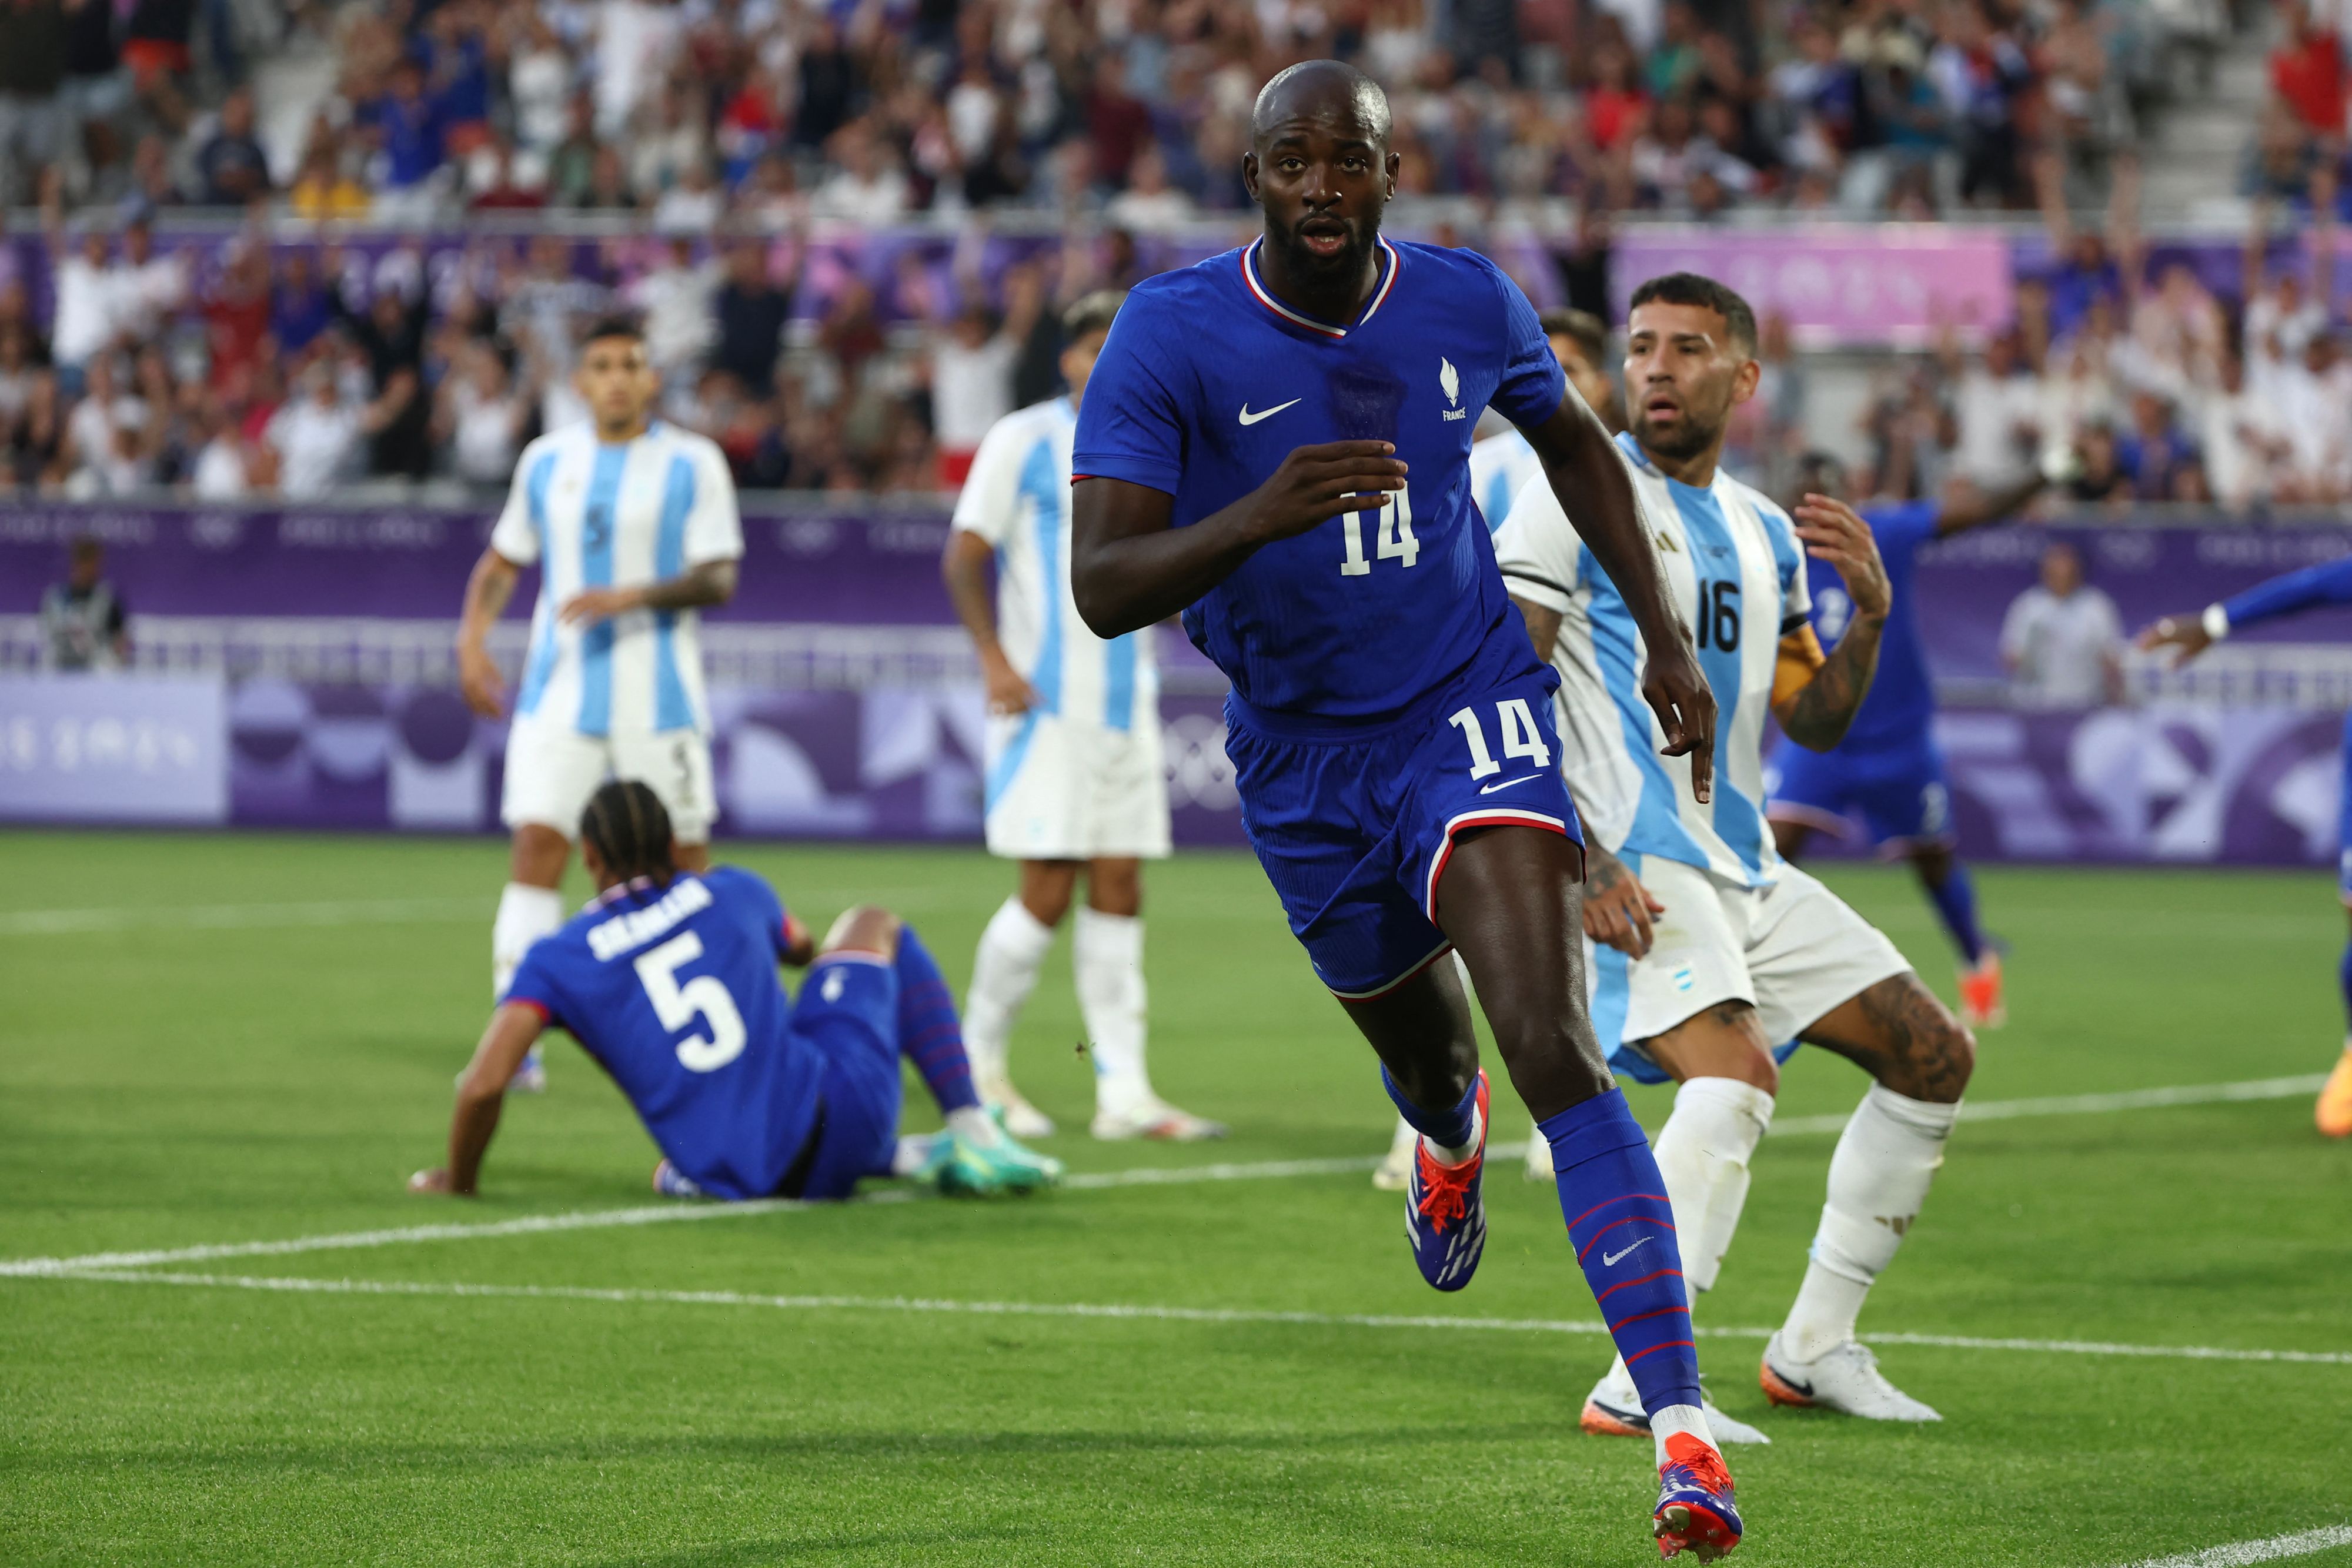 France's forward #14 Jean-Philippe Mateta celebrates scoring his team's first goal in the men's quarter-final football match between France and Argentina during the Paris 2024 Olympic Games at the Bordeaux Stadium in Bordeaux on August 2, 2024. (Photo by ROMAIN PERROCHEAU / AFP)